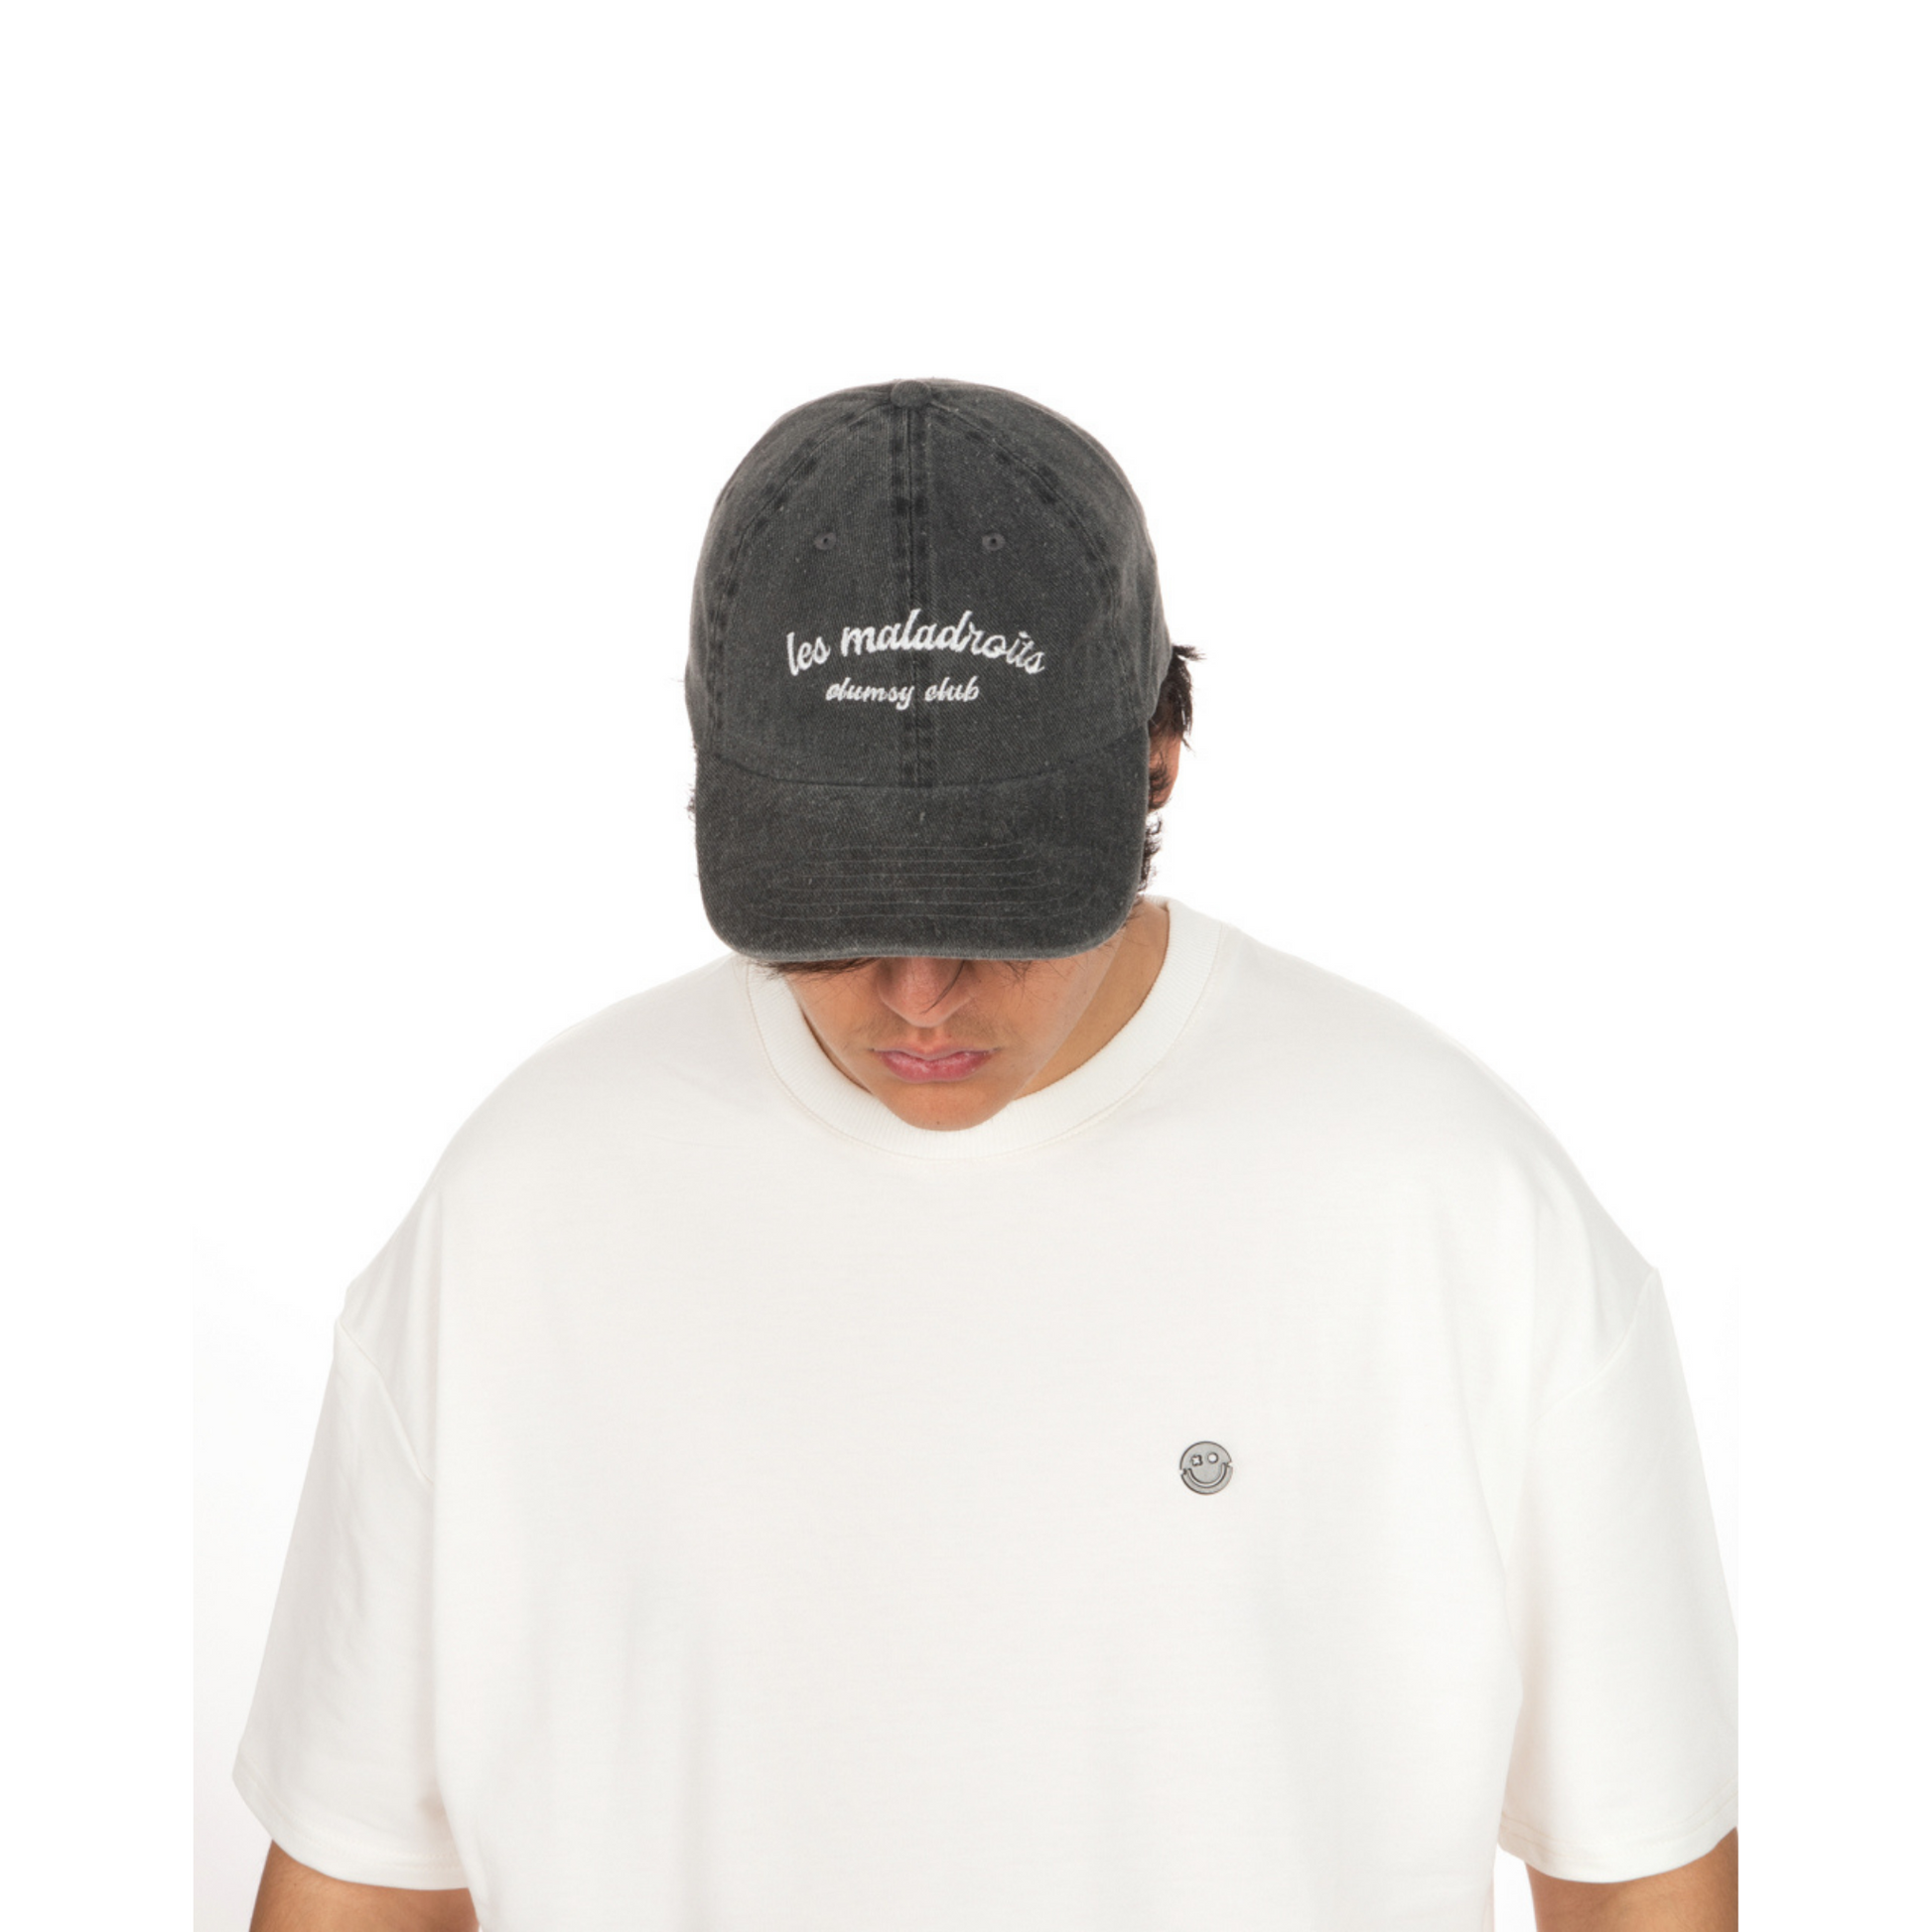 Washed Grey Hat – Les Maladroits Clumsy Club front view on male model with white T-shirt